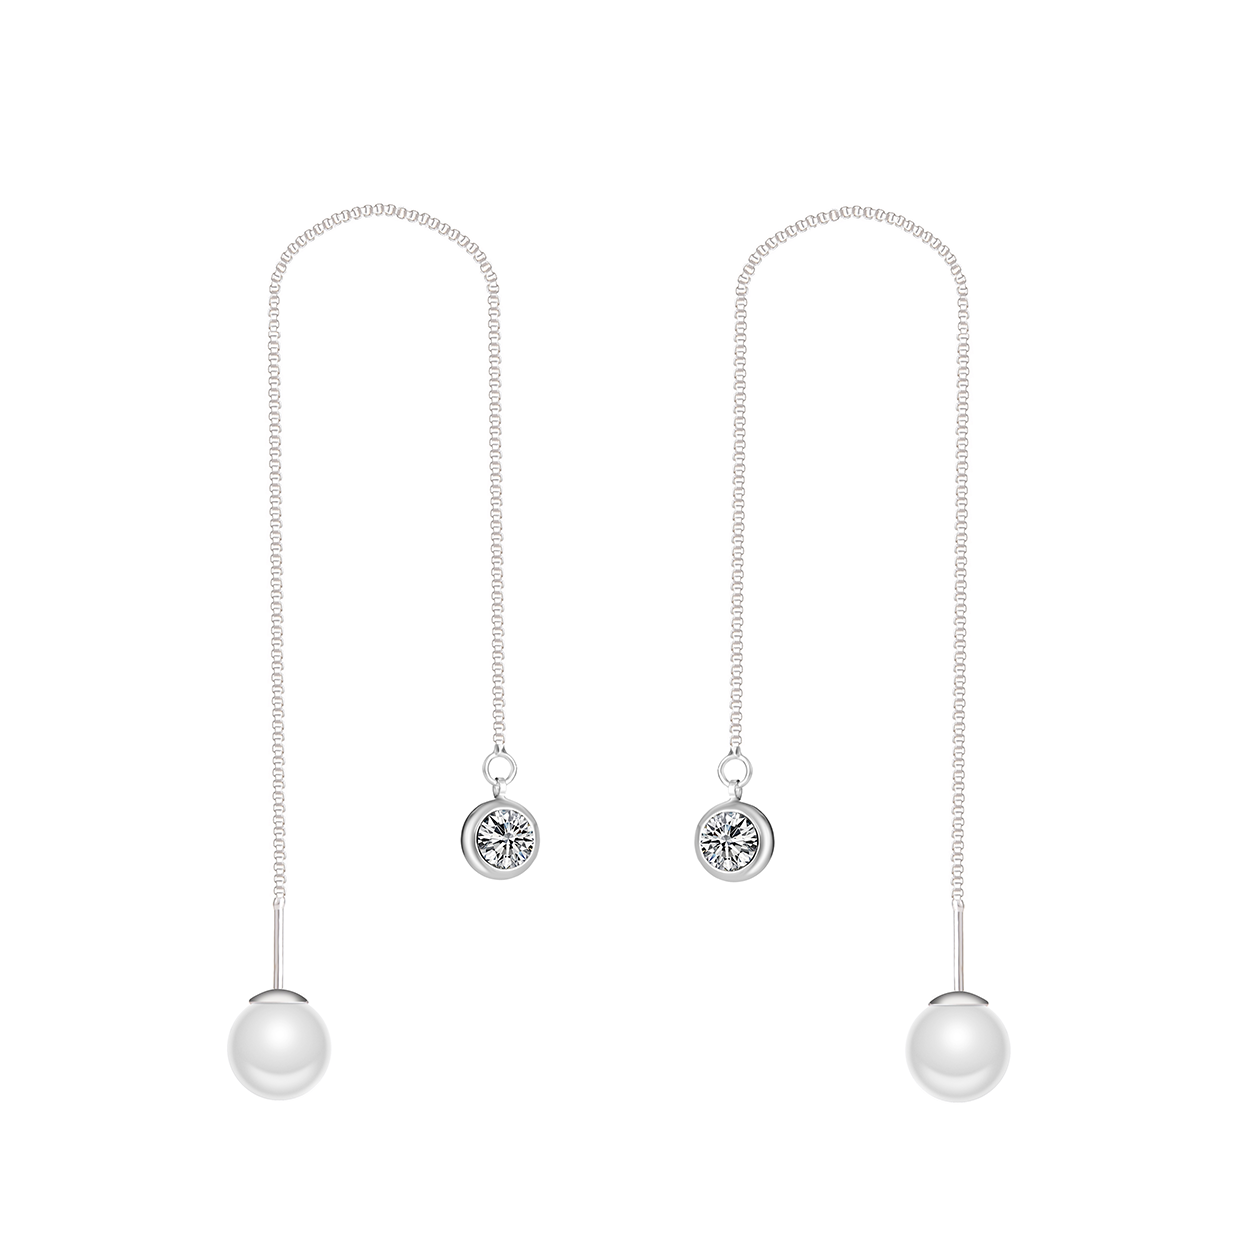 Silver Plated Pearl Thread Earrings Created with Zircondia® Crystals by Philip Jones Jewellery